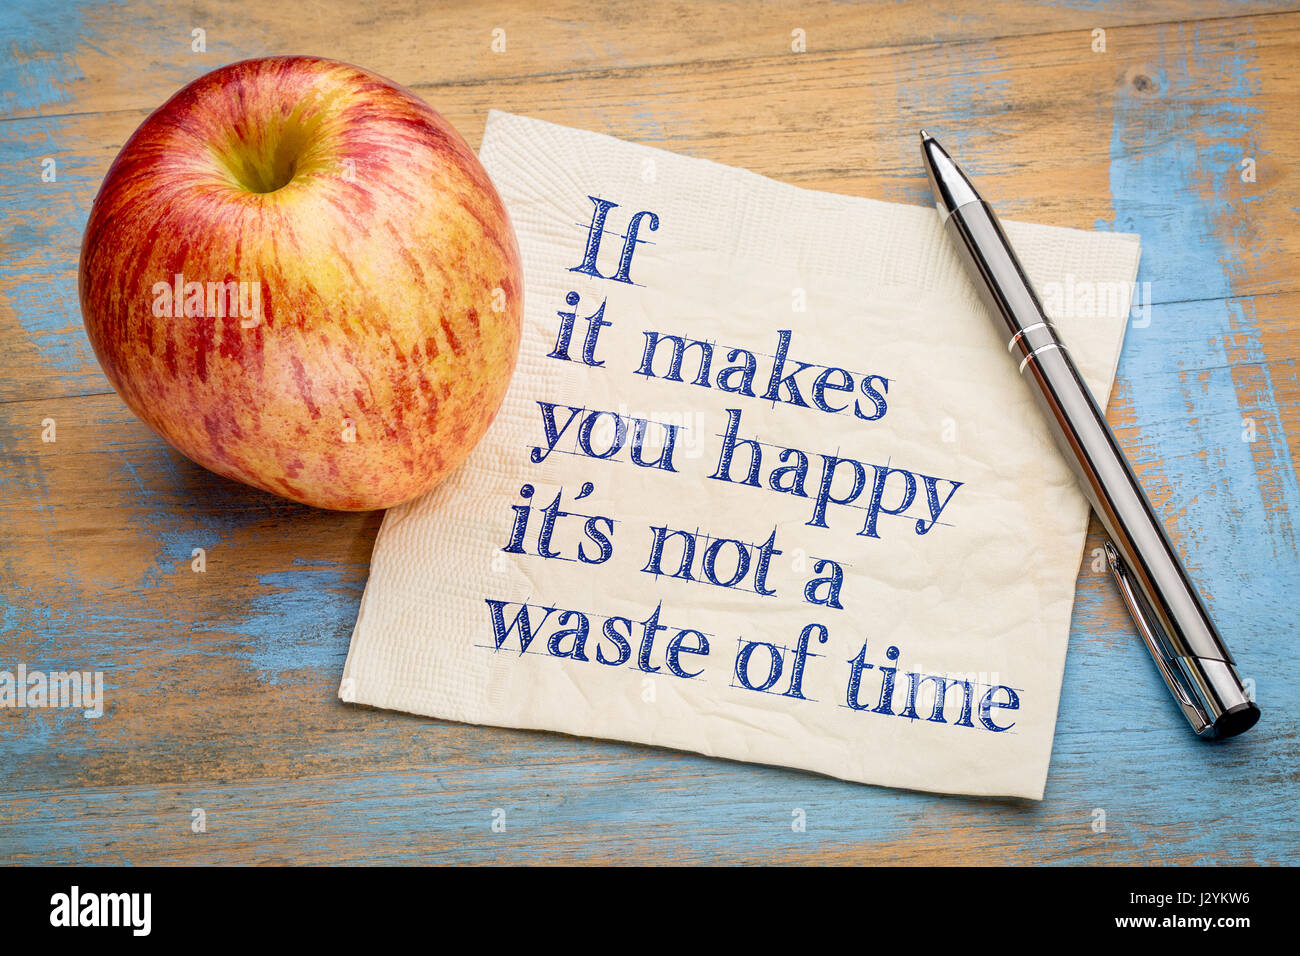 If it makes you happy it is not a waste of time - inspirational handwriting on a napkin with a fresh apple Stock Photo